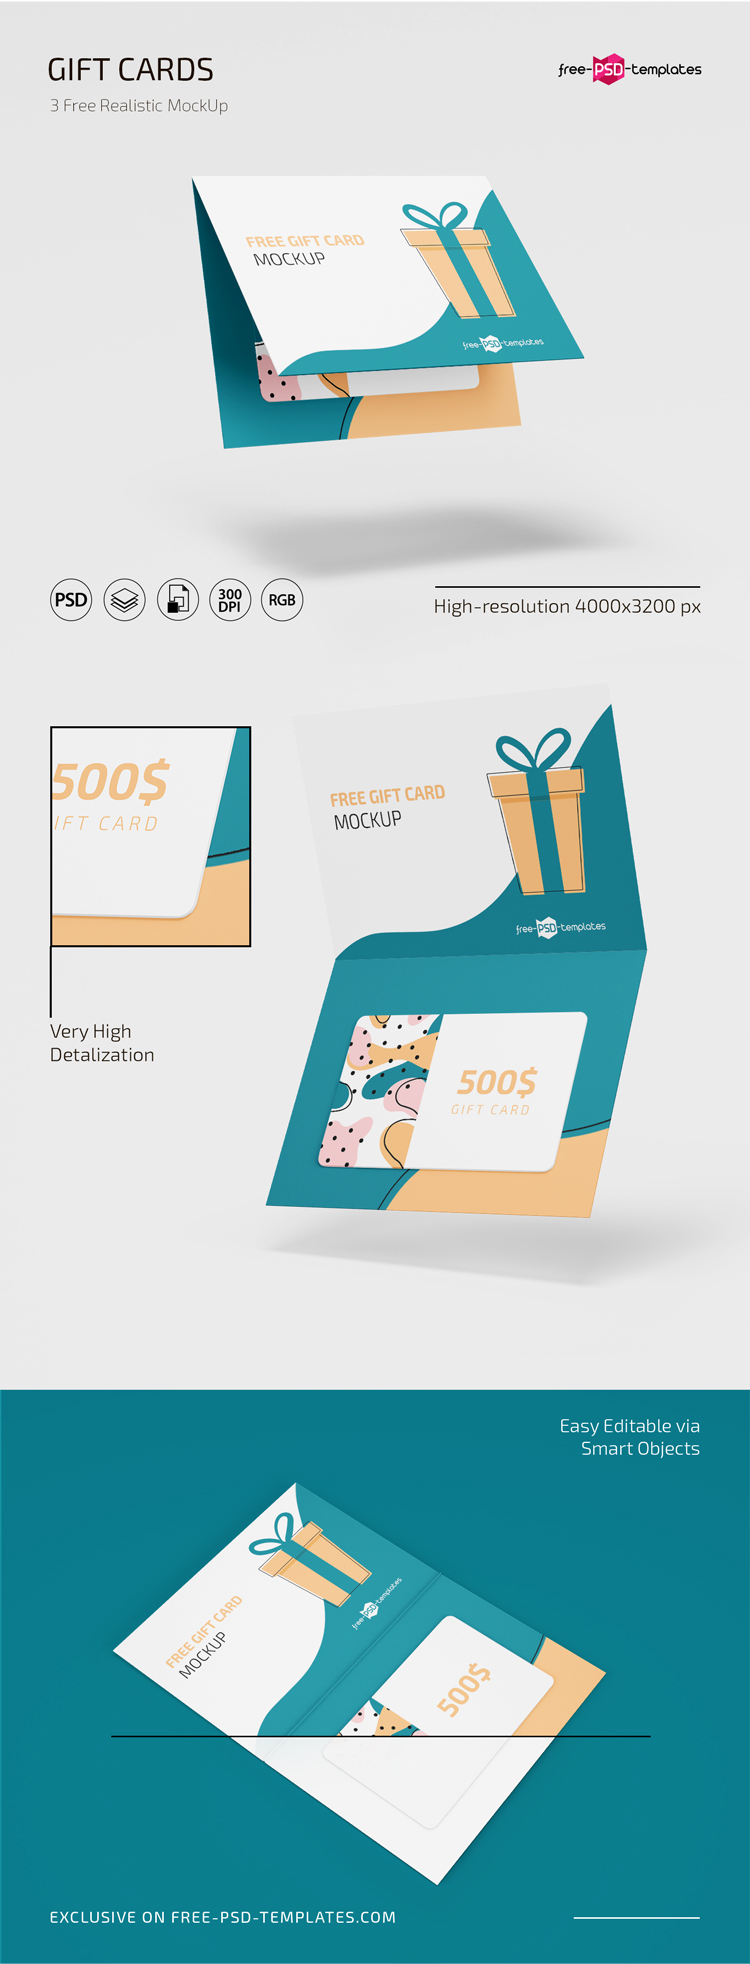 Download Free Psd Gift Cards Mockup Set Free Psd Templates